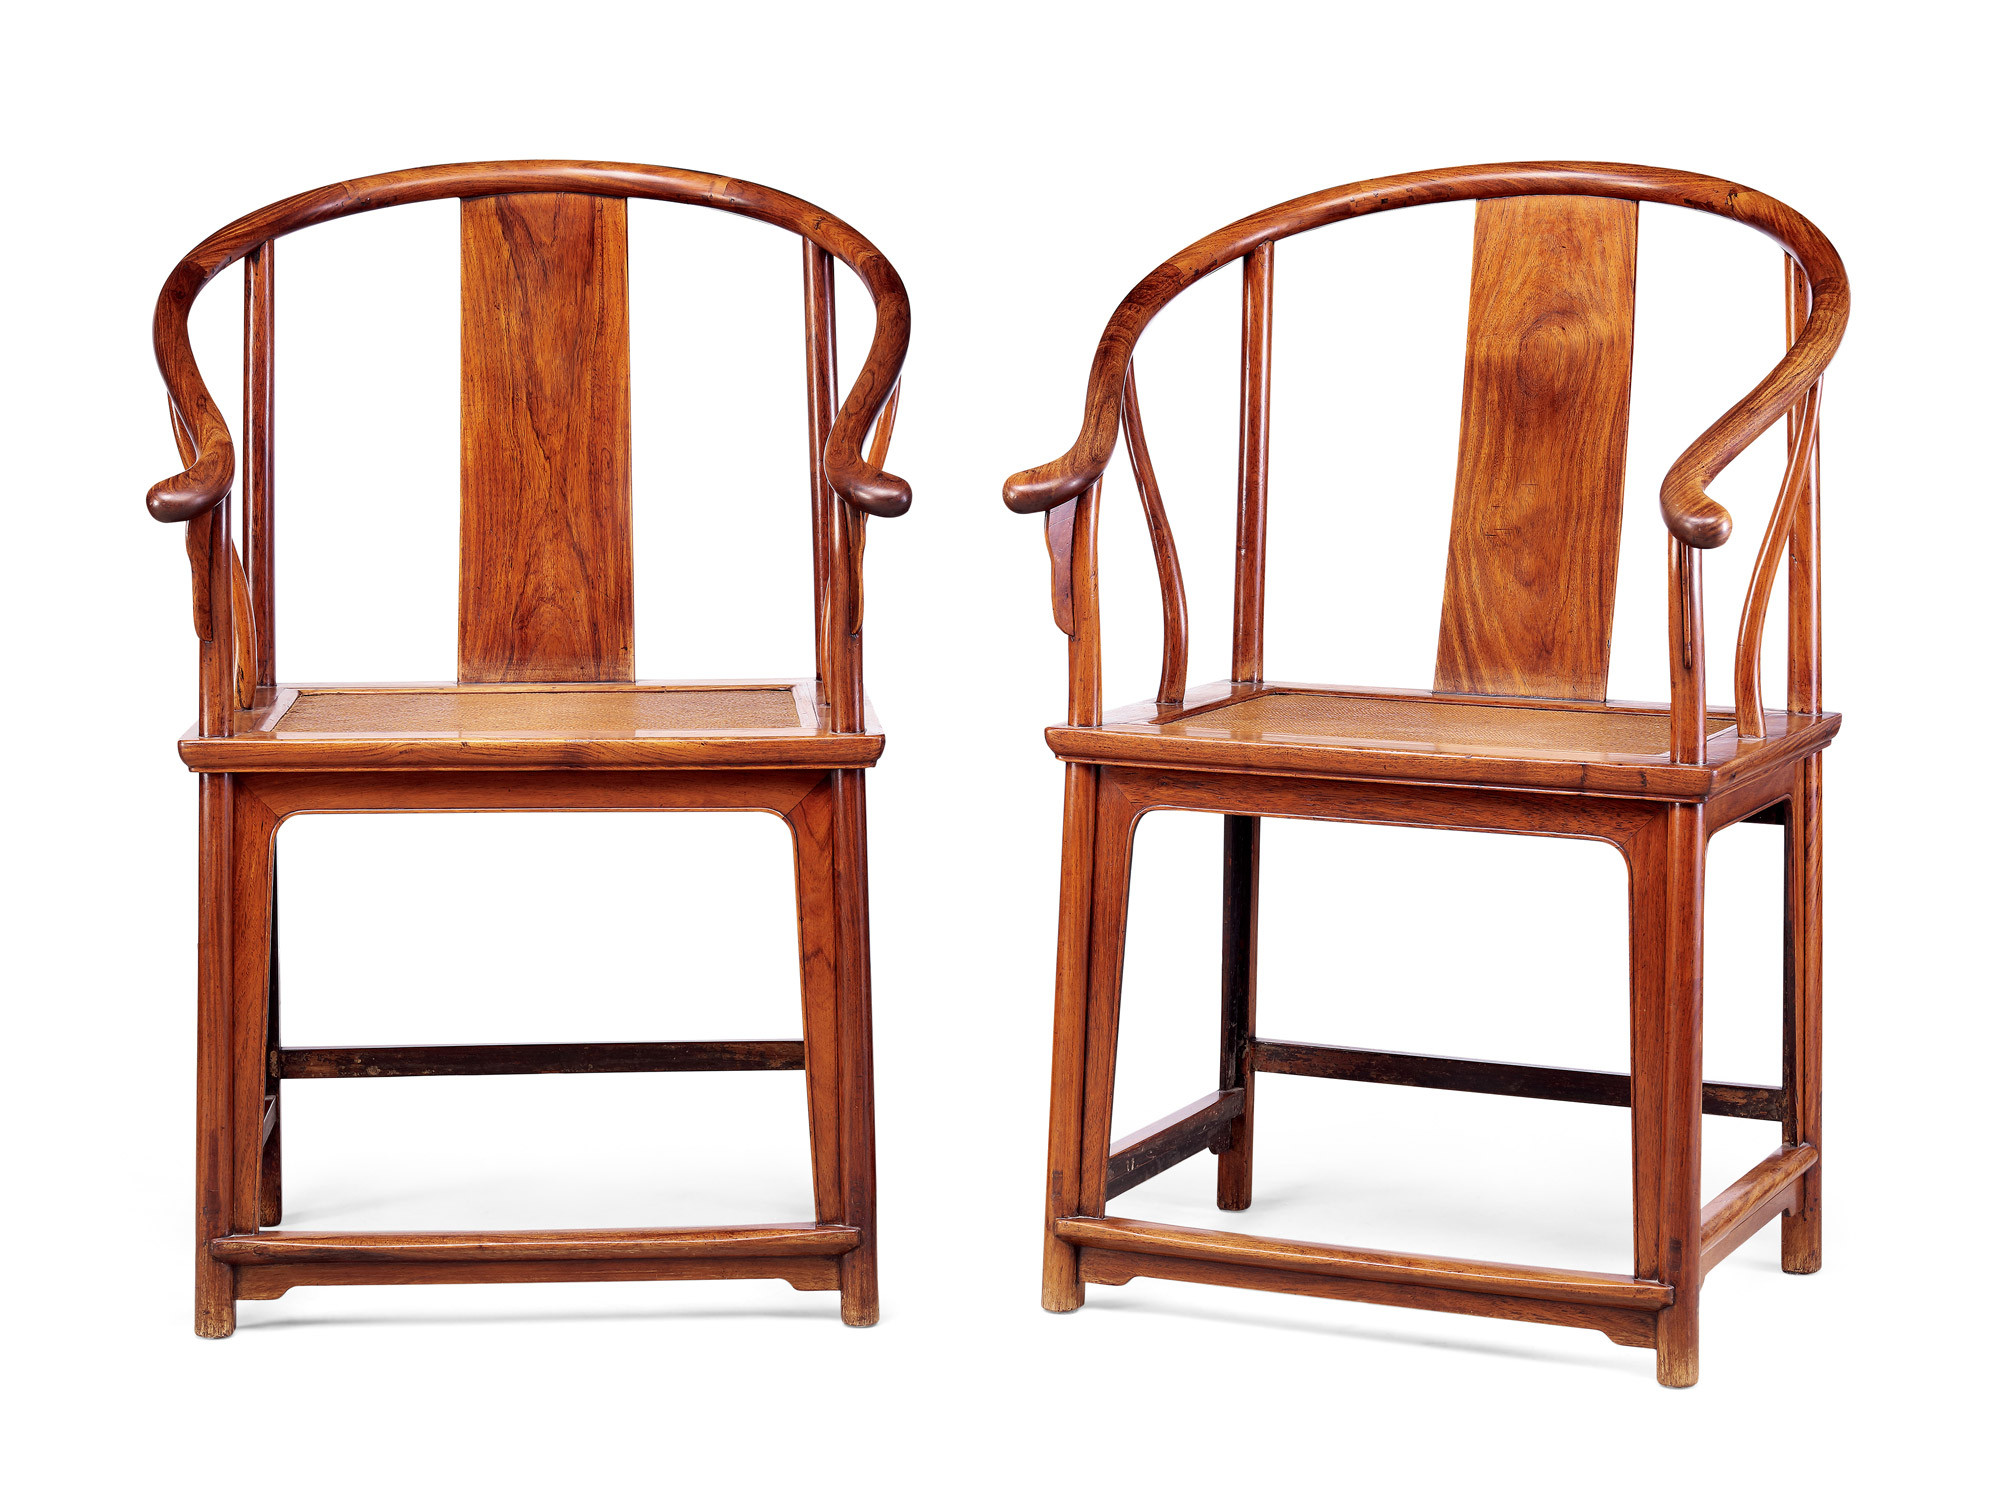 AN EXTREMELY RARE AND IMPORTANT PAIR OF HUANGHUALI ARMCHAIRS, QUANYI